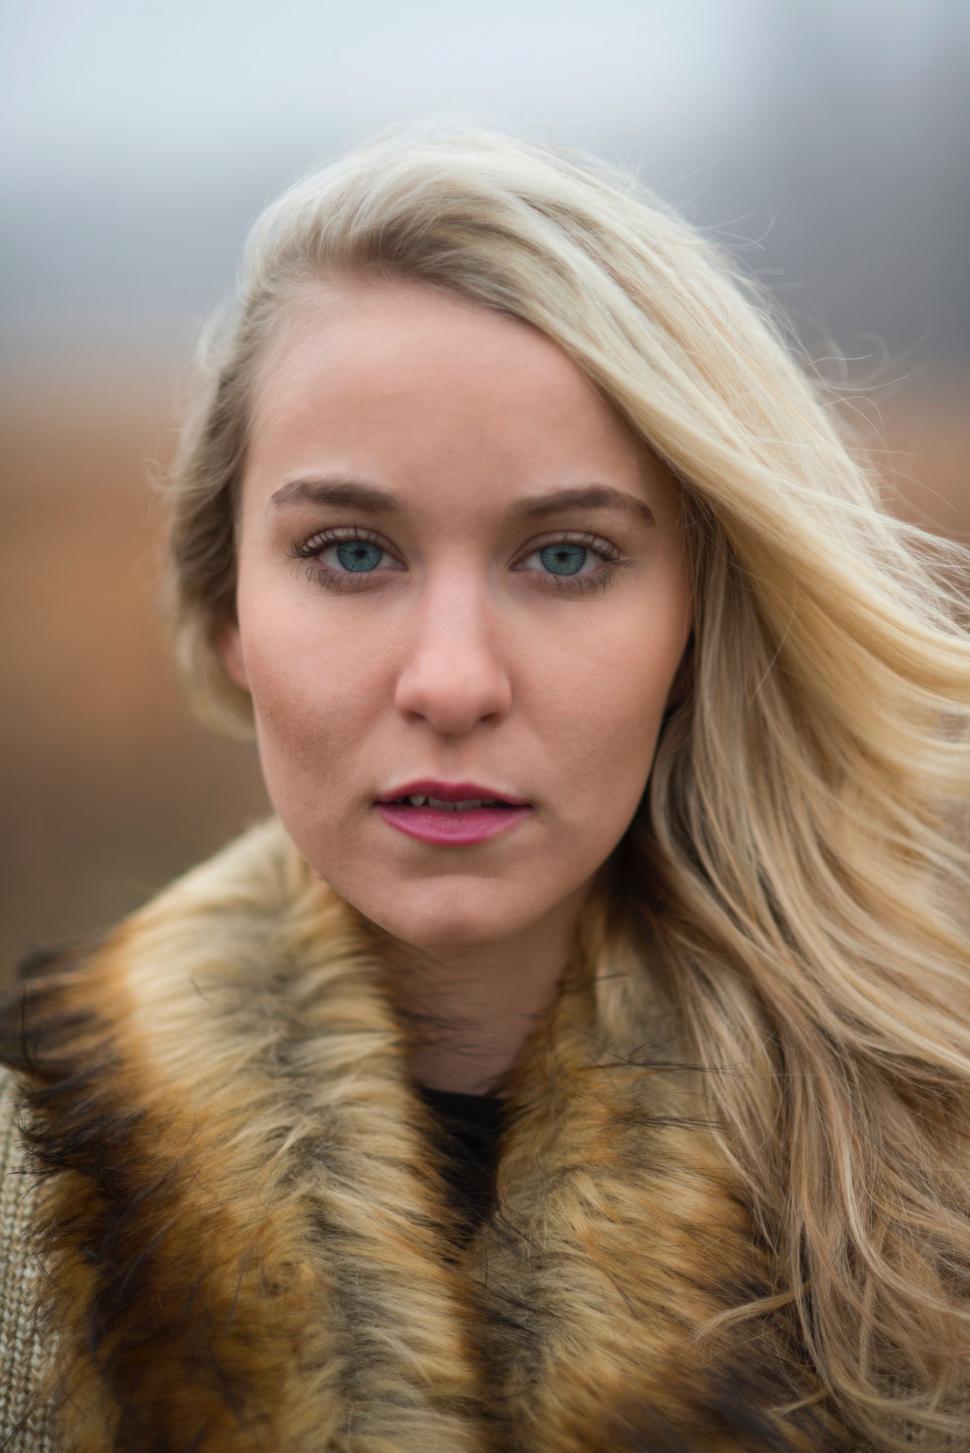 Free Image of Woman With Blonde Hair and Fur Collar 